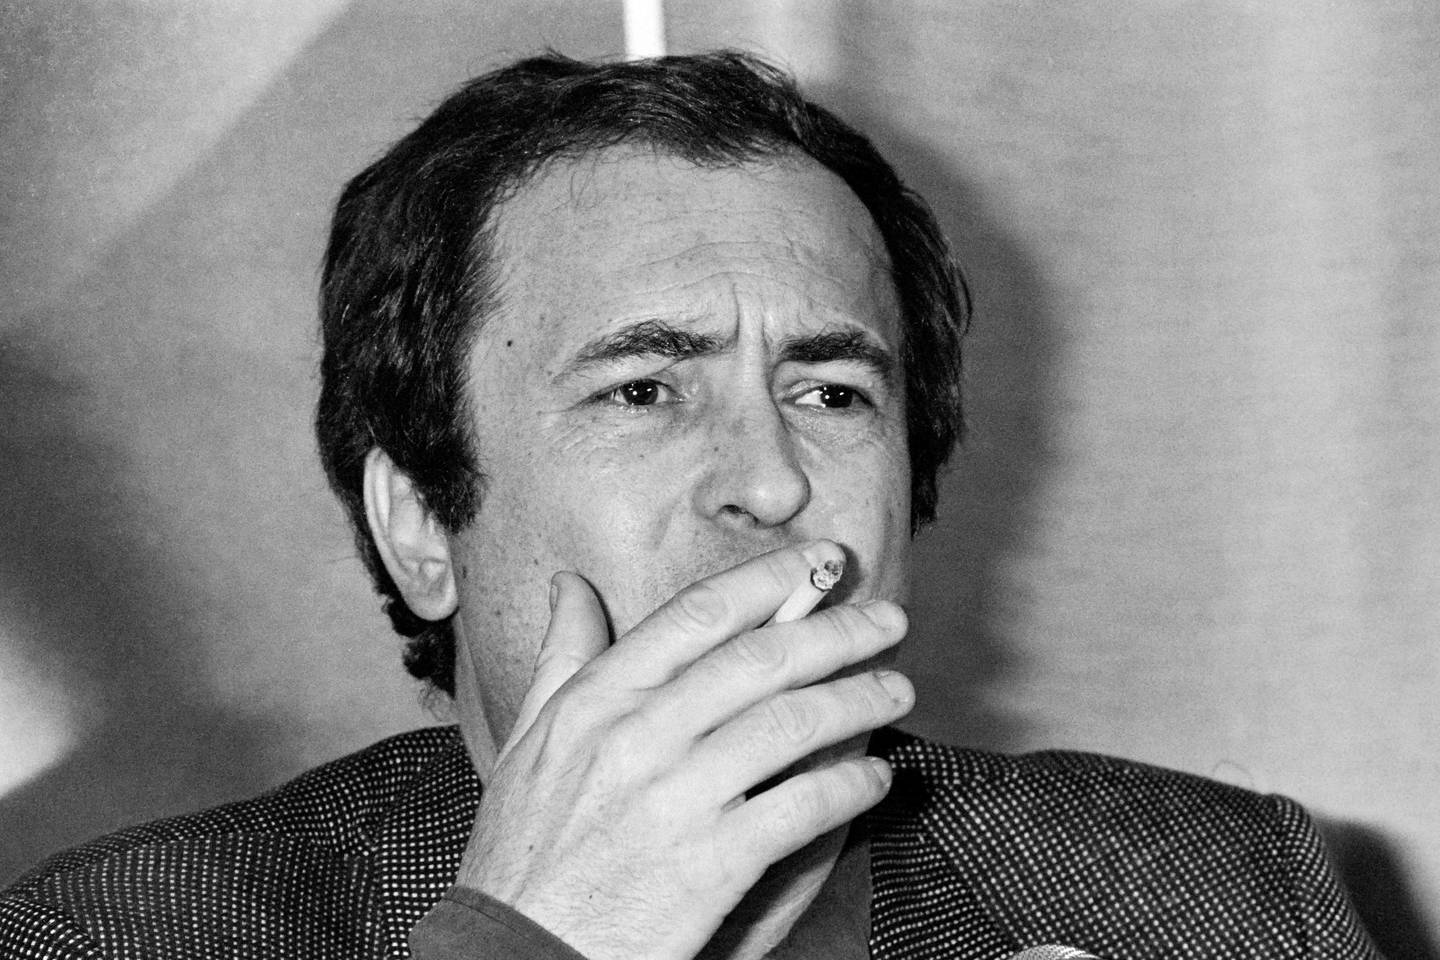 A picture taken on May 25, 1981 in Cannes shows Italien director Bernardo Bertolucci smoking as he presents his movie "Tragedy of a ridiculous man" during the 34th Cannes film festival. - Italian film director Bernardo Bertolucci, whose films include 'Last Tango In Paris' and 'The Last Emperor', has died in Rome aged 77, Italian media said on November 28, 2018. (Photo by Ralph GATTI / AFP)